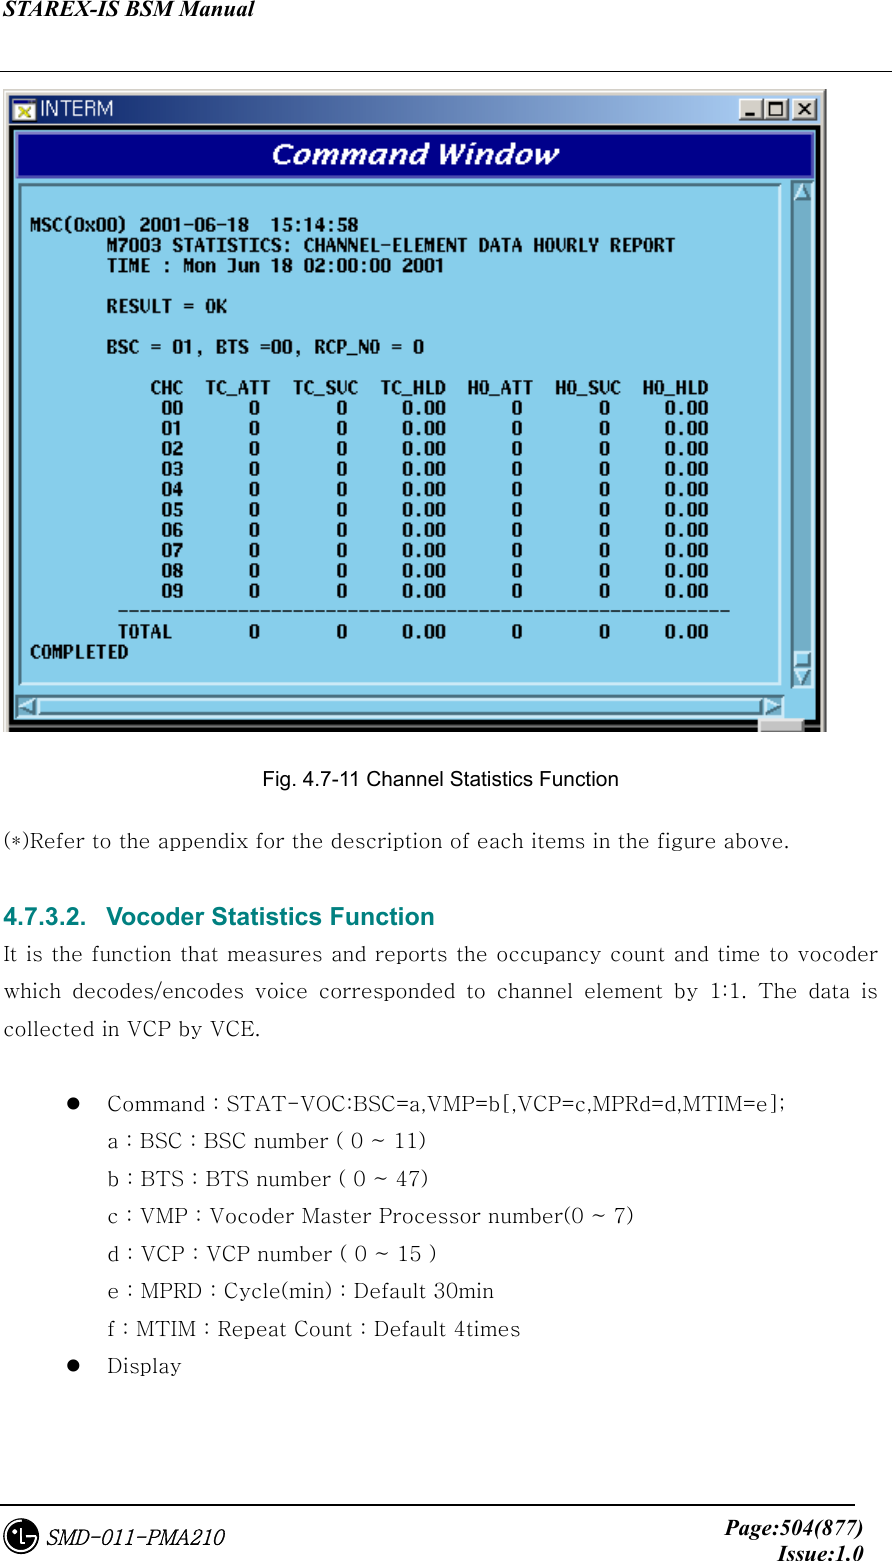 STAREX-IS BSM Manual     Page:504(877)Issue:1.0SMD-011-PMA210  Fig. 4.7-11 Channel Statistics Function (*)Refer to the appendix for the description of each items in the figure above.  4.7.3.2.   Vocoder Statistics Function It is the function that measures and reports the occupancy count and time to vocoder which  decodes/encodes  voice  corresponded  to  channel  element  by  1:1.  The  data  is collected in VCP by VCE.    Command : STAT-VOC:BSC=a,VMP=b[,VCP=c,MPRd=d,MTIM=e]; a : BSC : BSC number ( 0 ~ 11) b : BTS : BTS number ( 0 ~ 47) c : VMP : Vocoder Master Processor number(0 ~ 7) d : VCP : VCP number ( 0 ~ 15 ) e : MPRD : Cycle(min) : Default 30min f : MTIM : Repeat Count : Default 4times   Display 